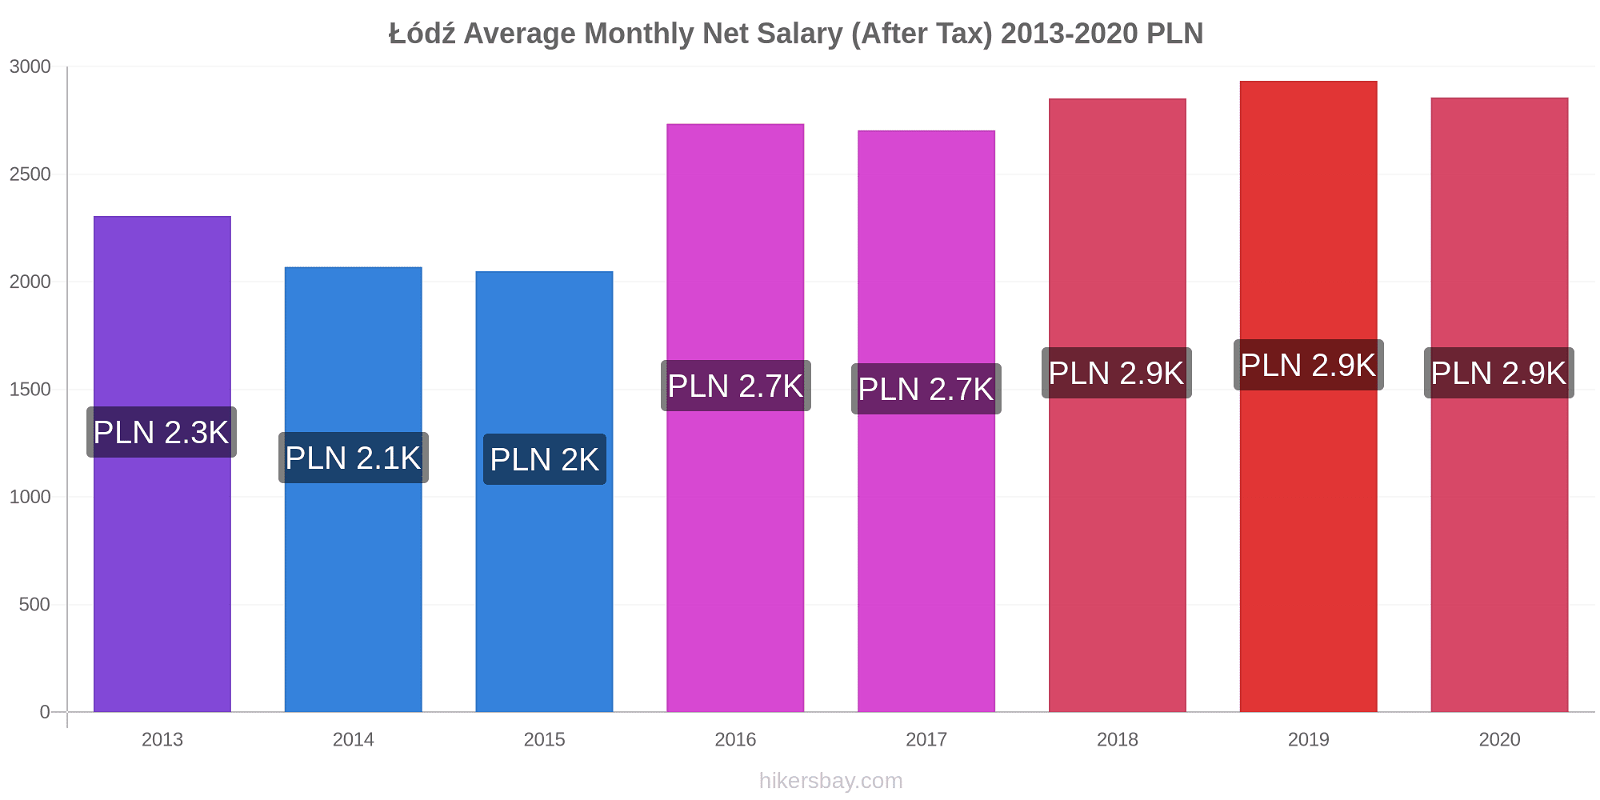 Łódź price changes Average Monthly Net Salary (After Tax) hikersbay.com